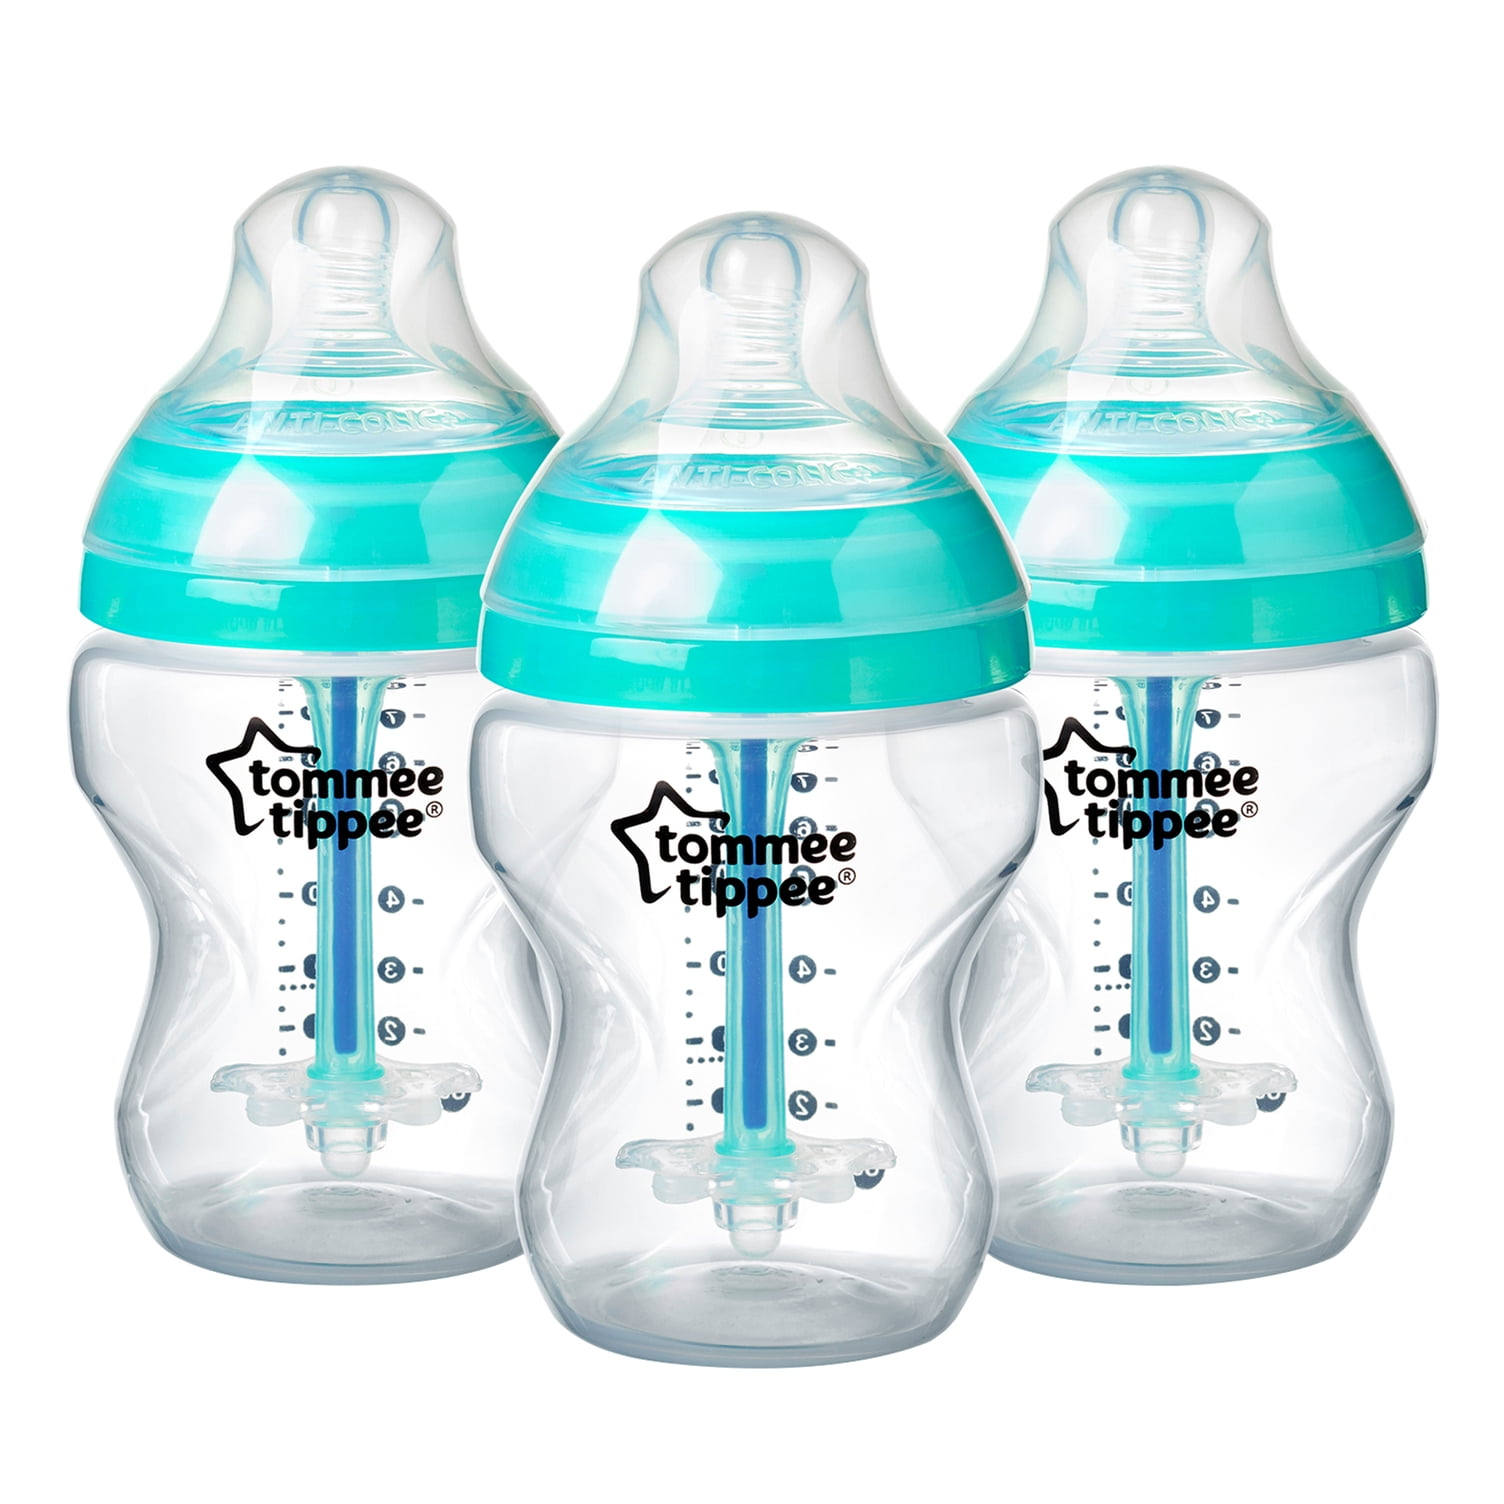 Tommee Tippee Anti-Colic Baby Bottles (9oz, 3 Count) | Slow Flow  Breast-Like Nipple, Unique Anti-Colic Vent